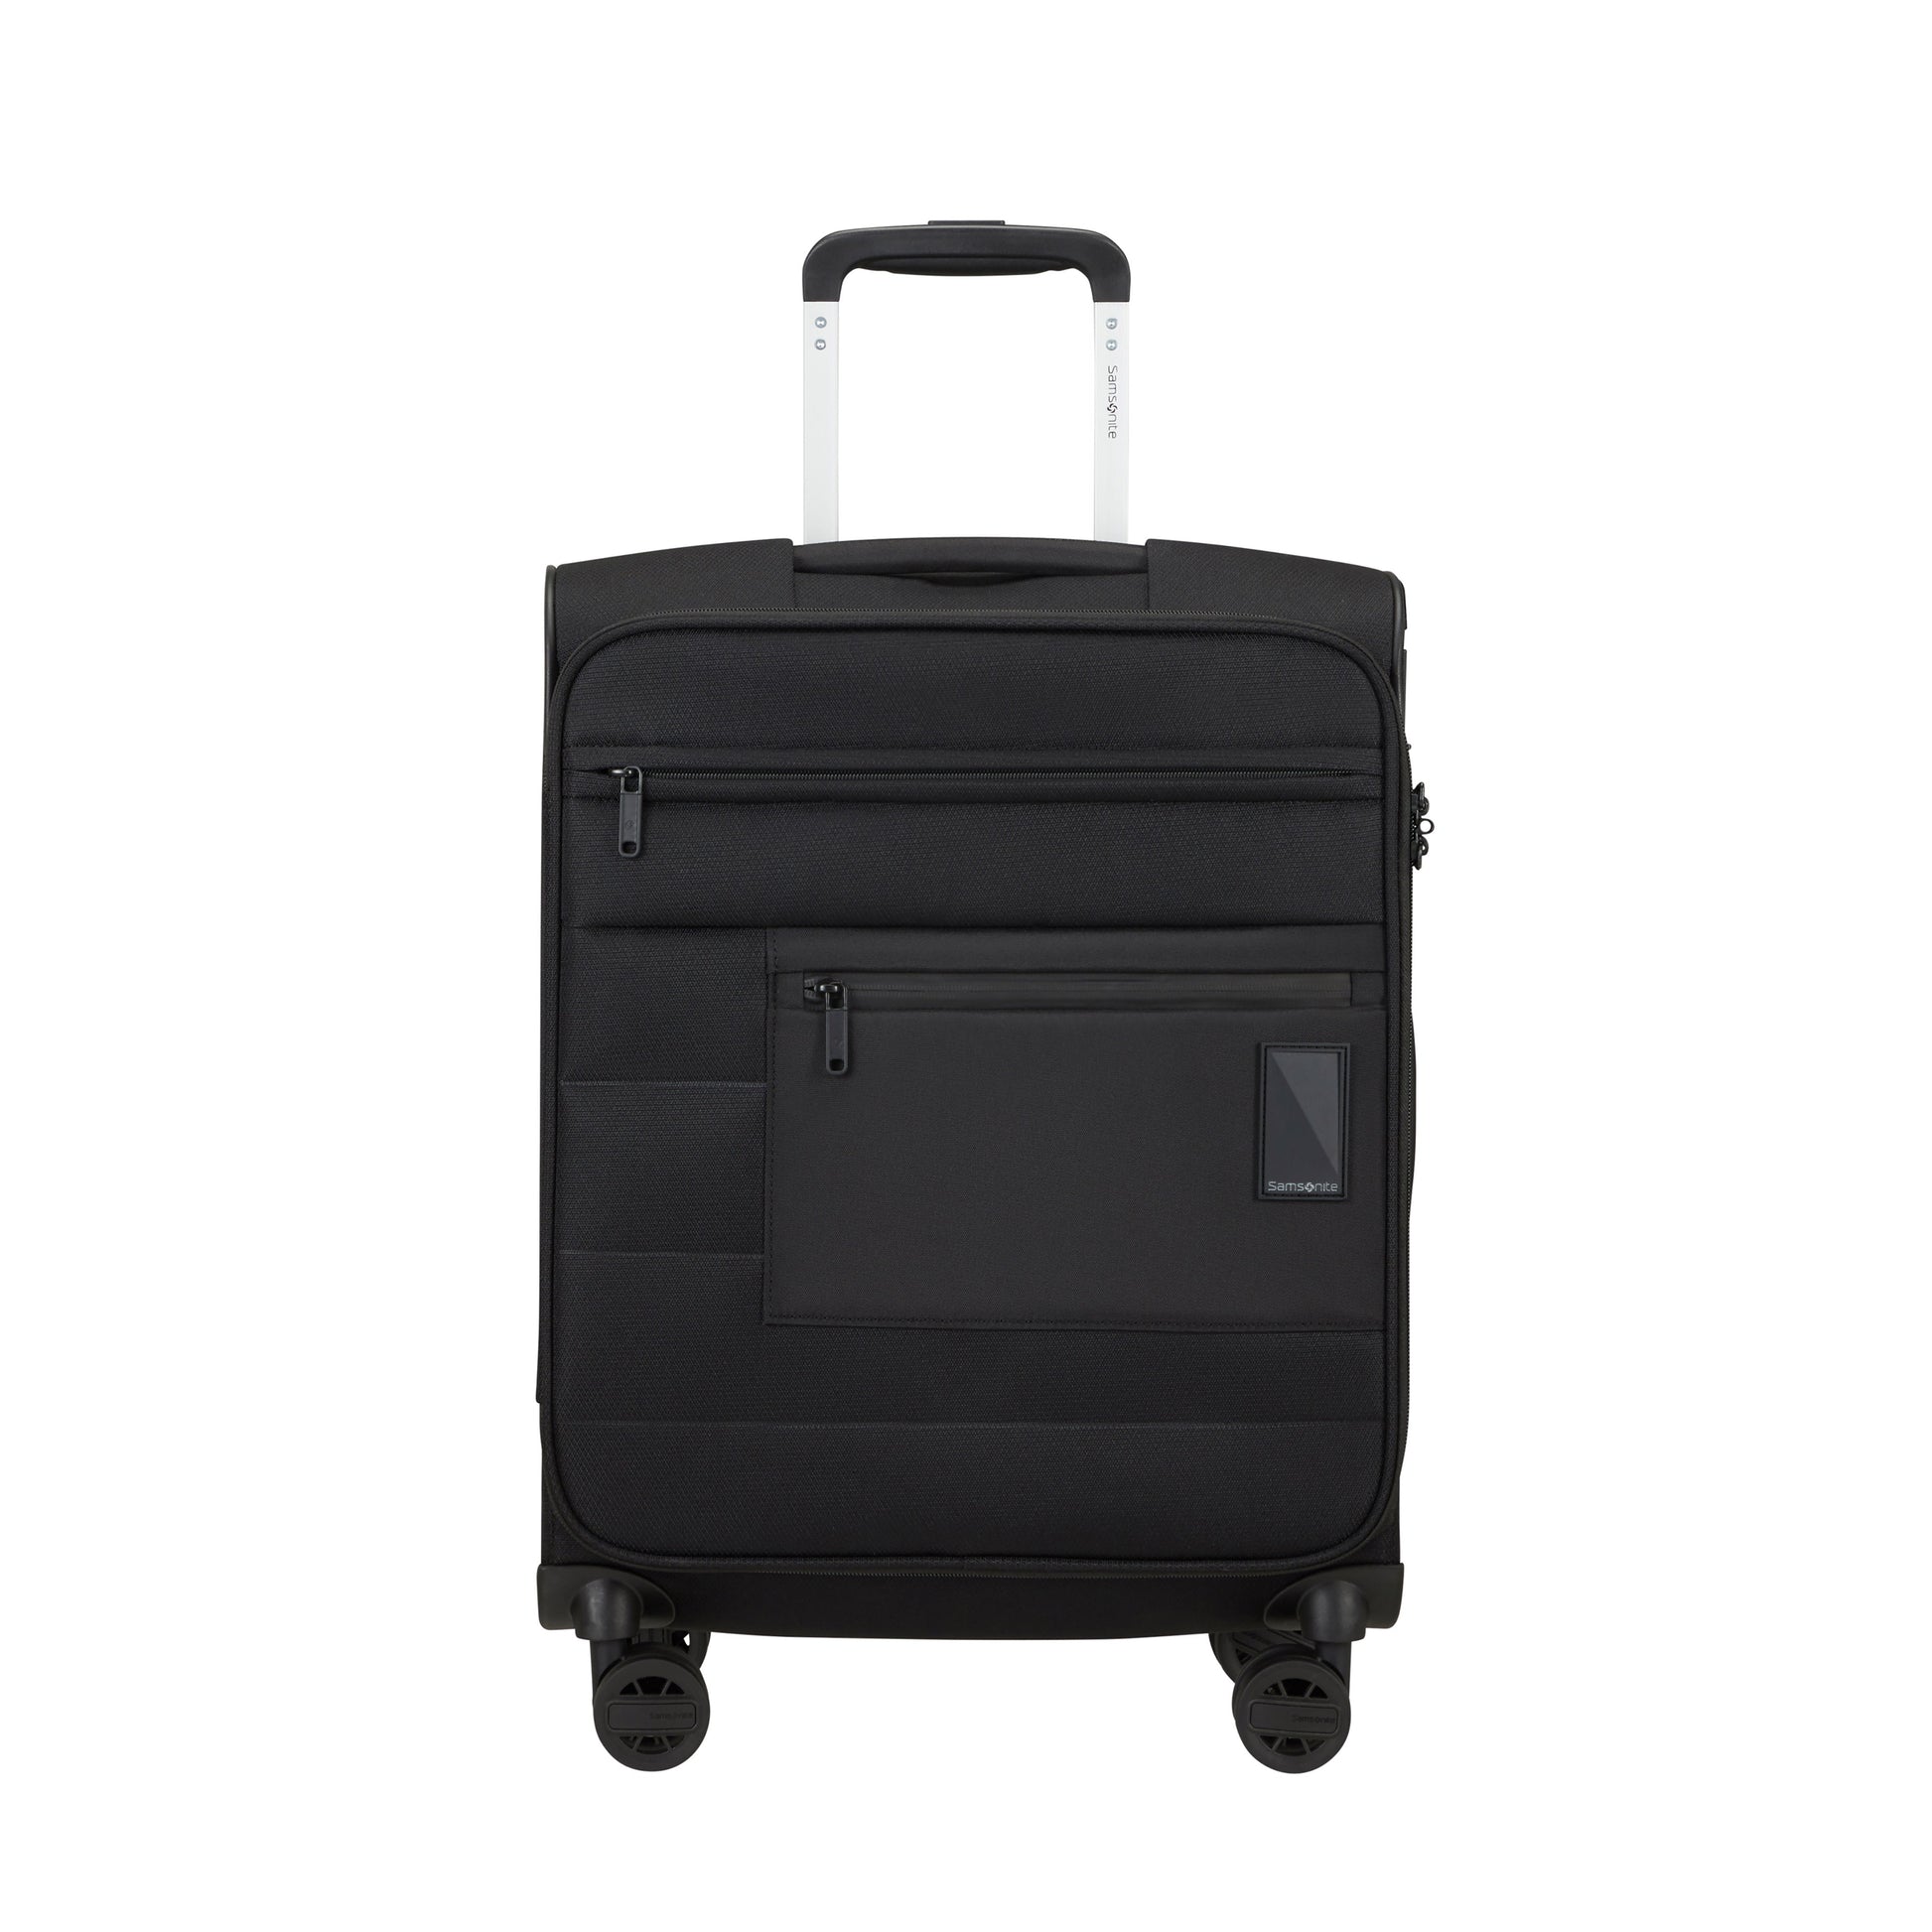 Samsonite Vacay Spinner Carry-On Luggage